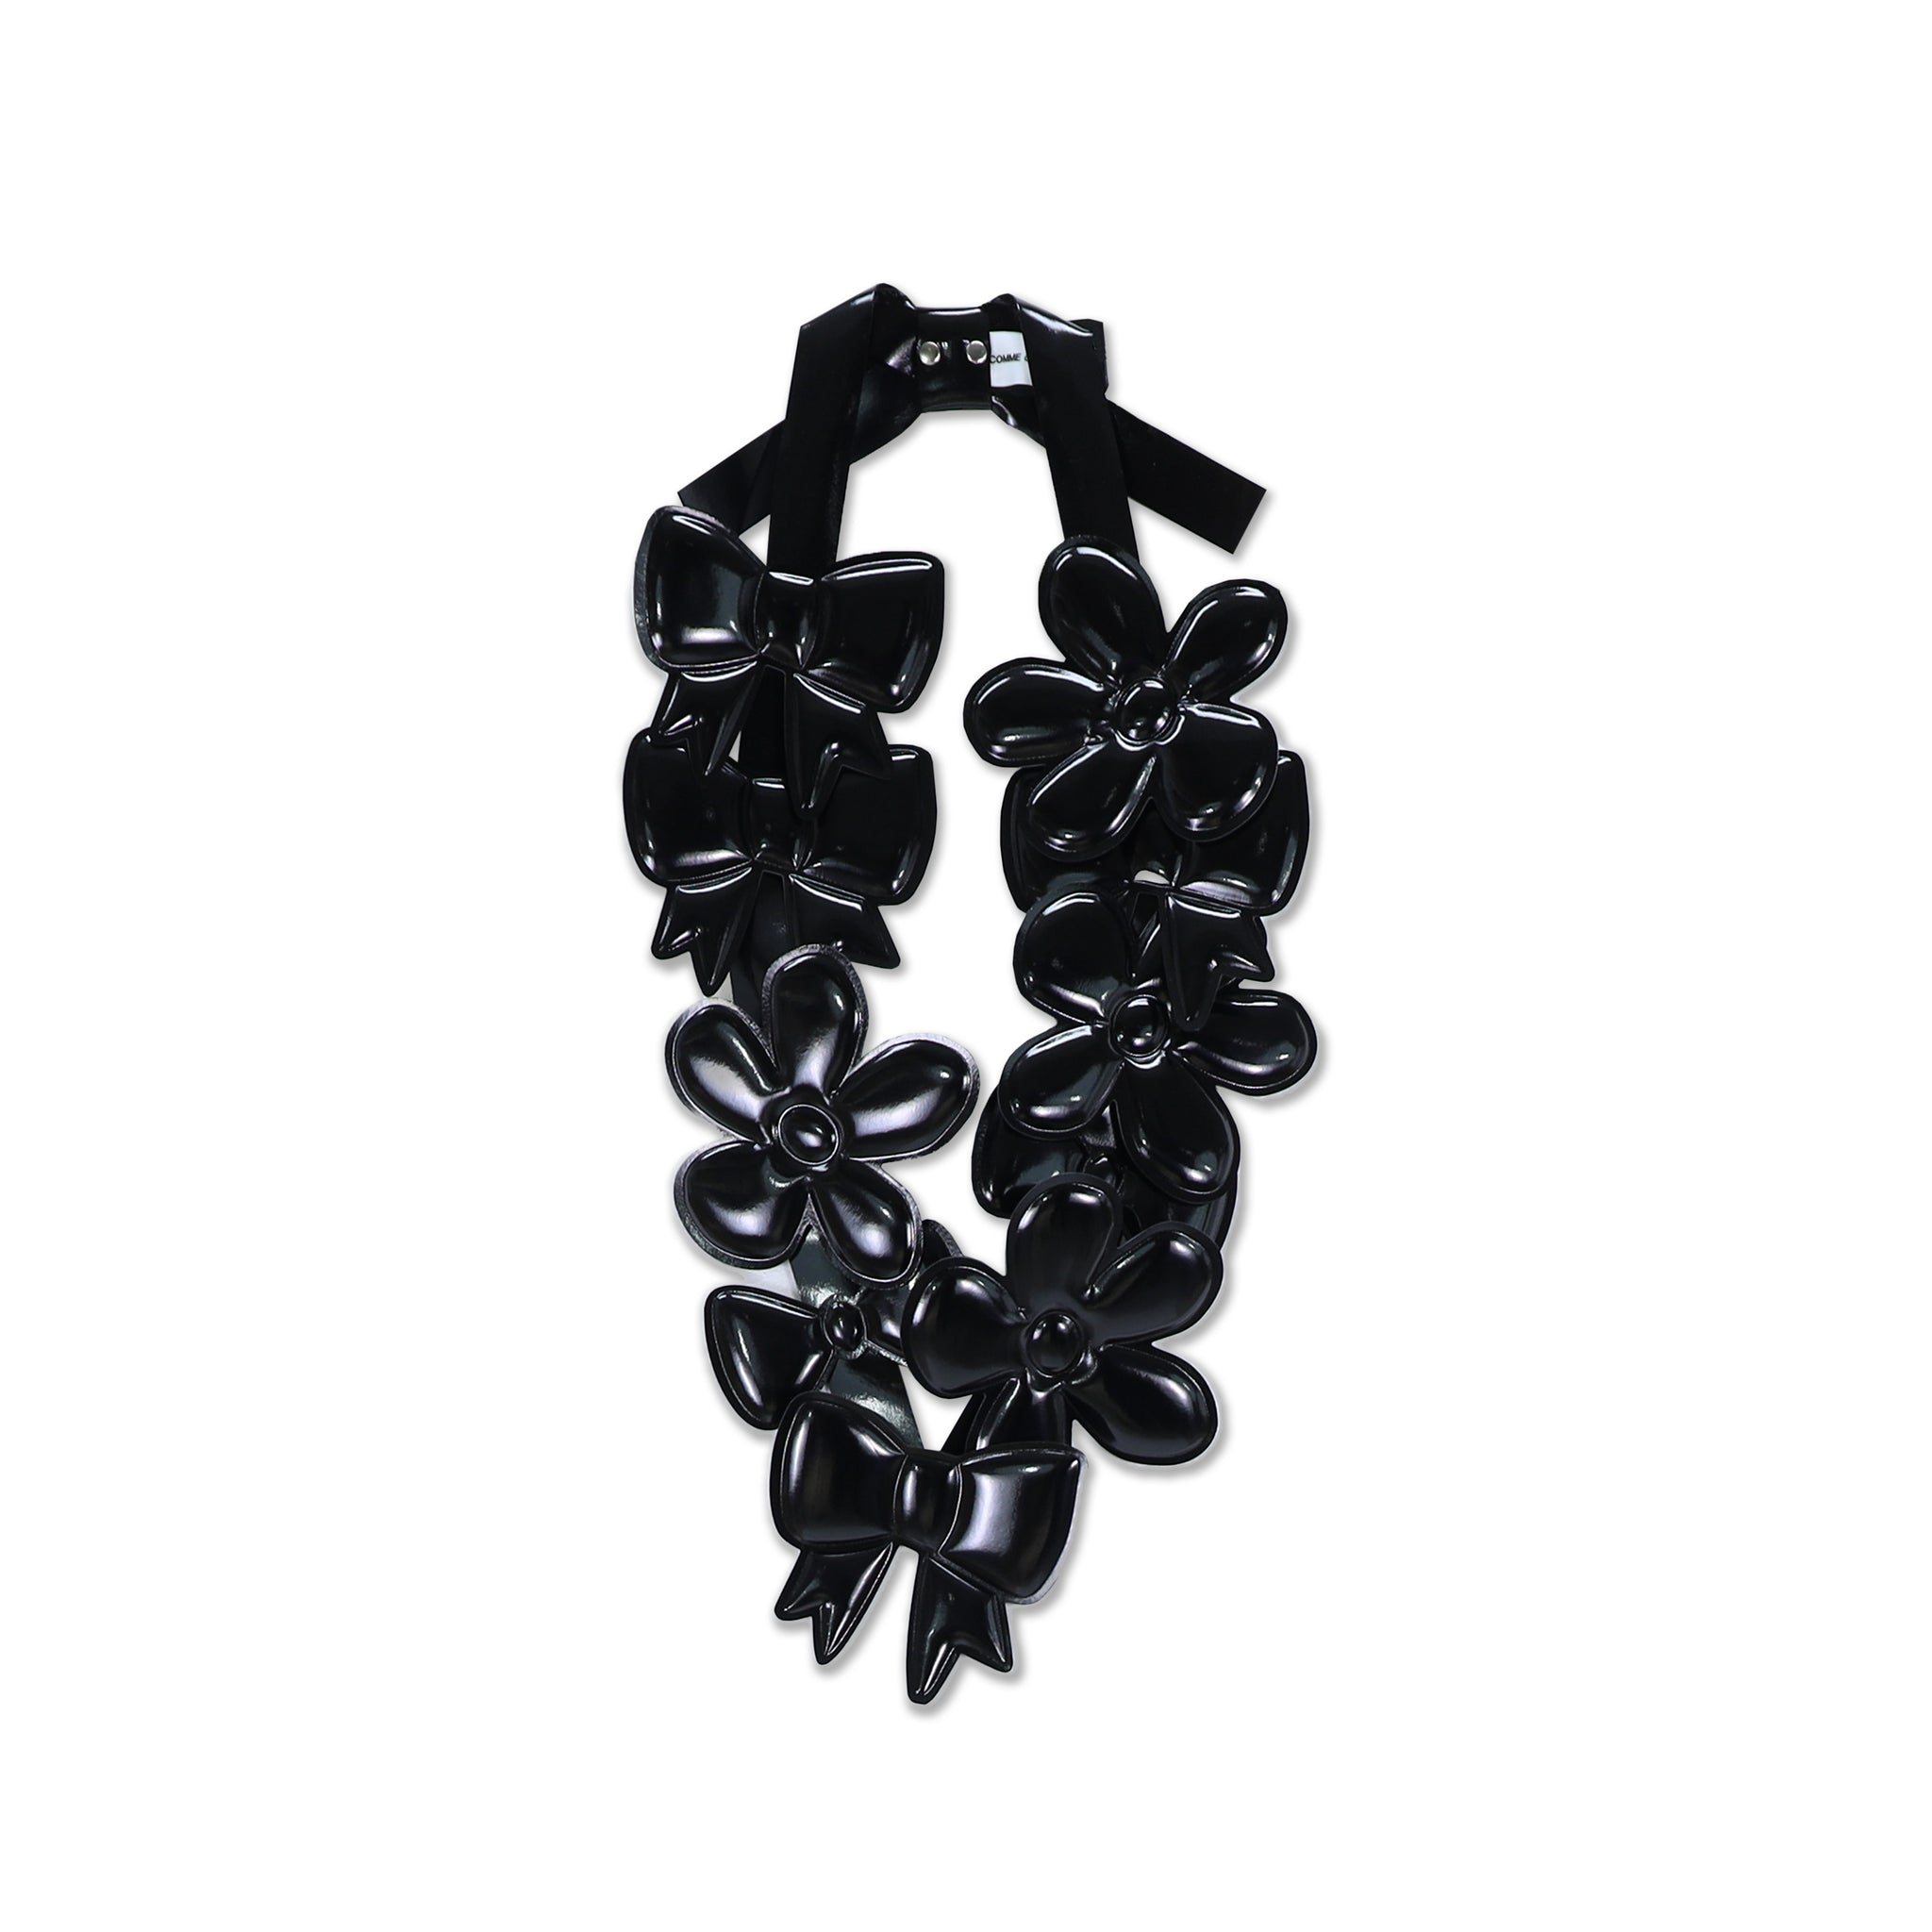 Polyurethane Bow and Flower Necklace Black